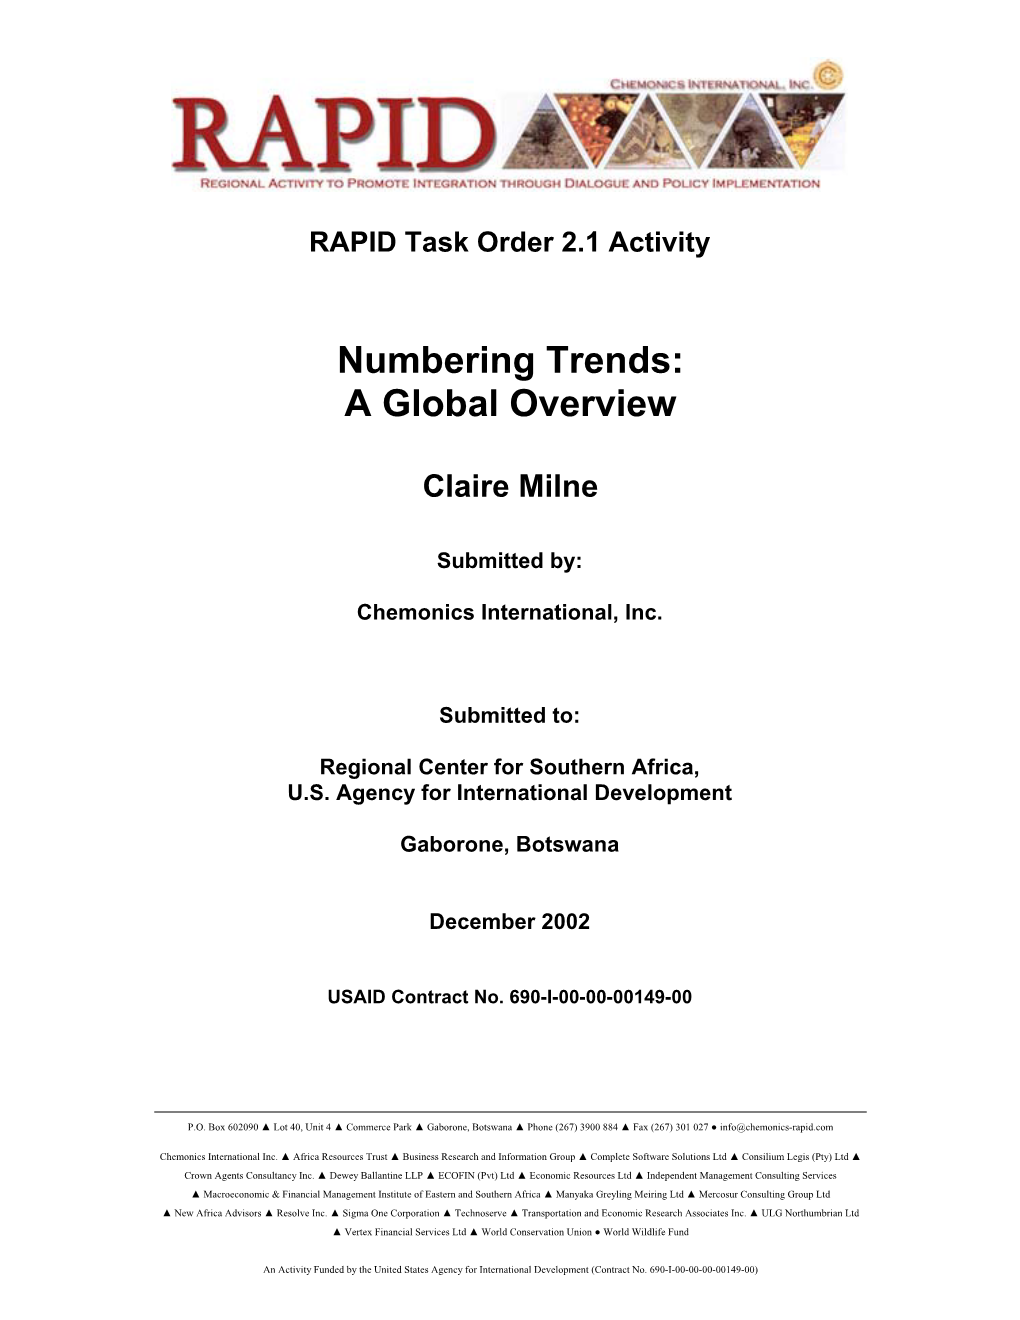 Numbering Trends: a Global Overview